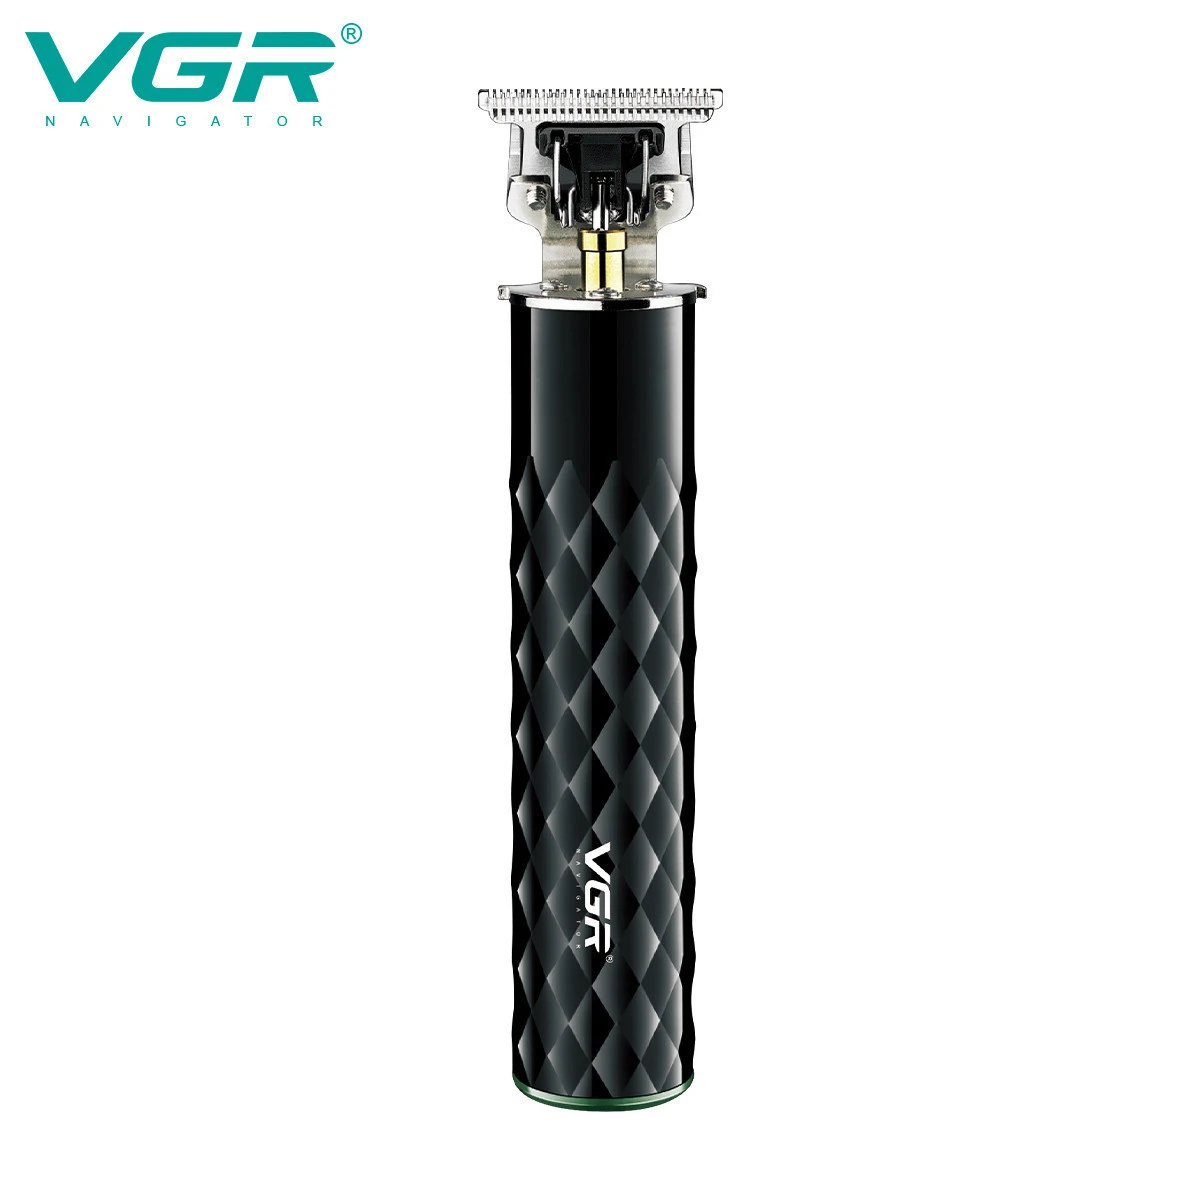 VGR   waterproof rechargeable hair trimmer V-170  rimmer hair clipper electronic d8